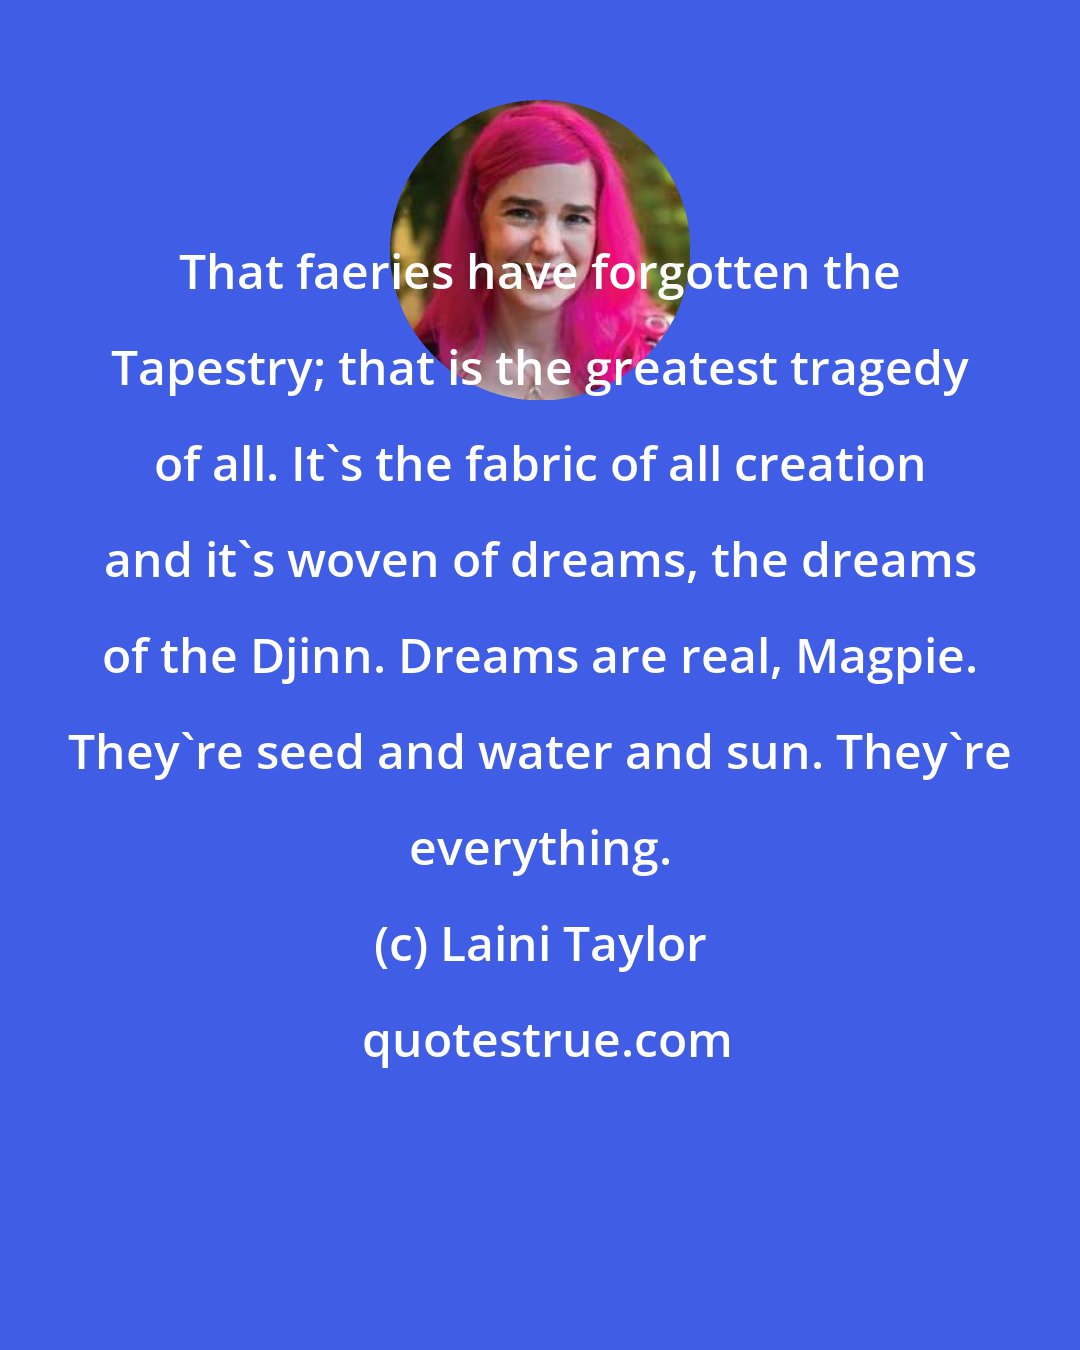 Laini Taylor: That faeries have forgotten the Tapestry; that is the greatest tragedy of all. It's the fabric of all creation and it's woven of dreams, the dreams of the Djinn. Dreams are real, Magpie. They're seed and water and sun. They're everything.